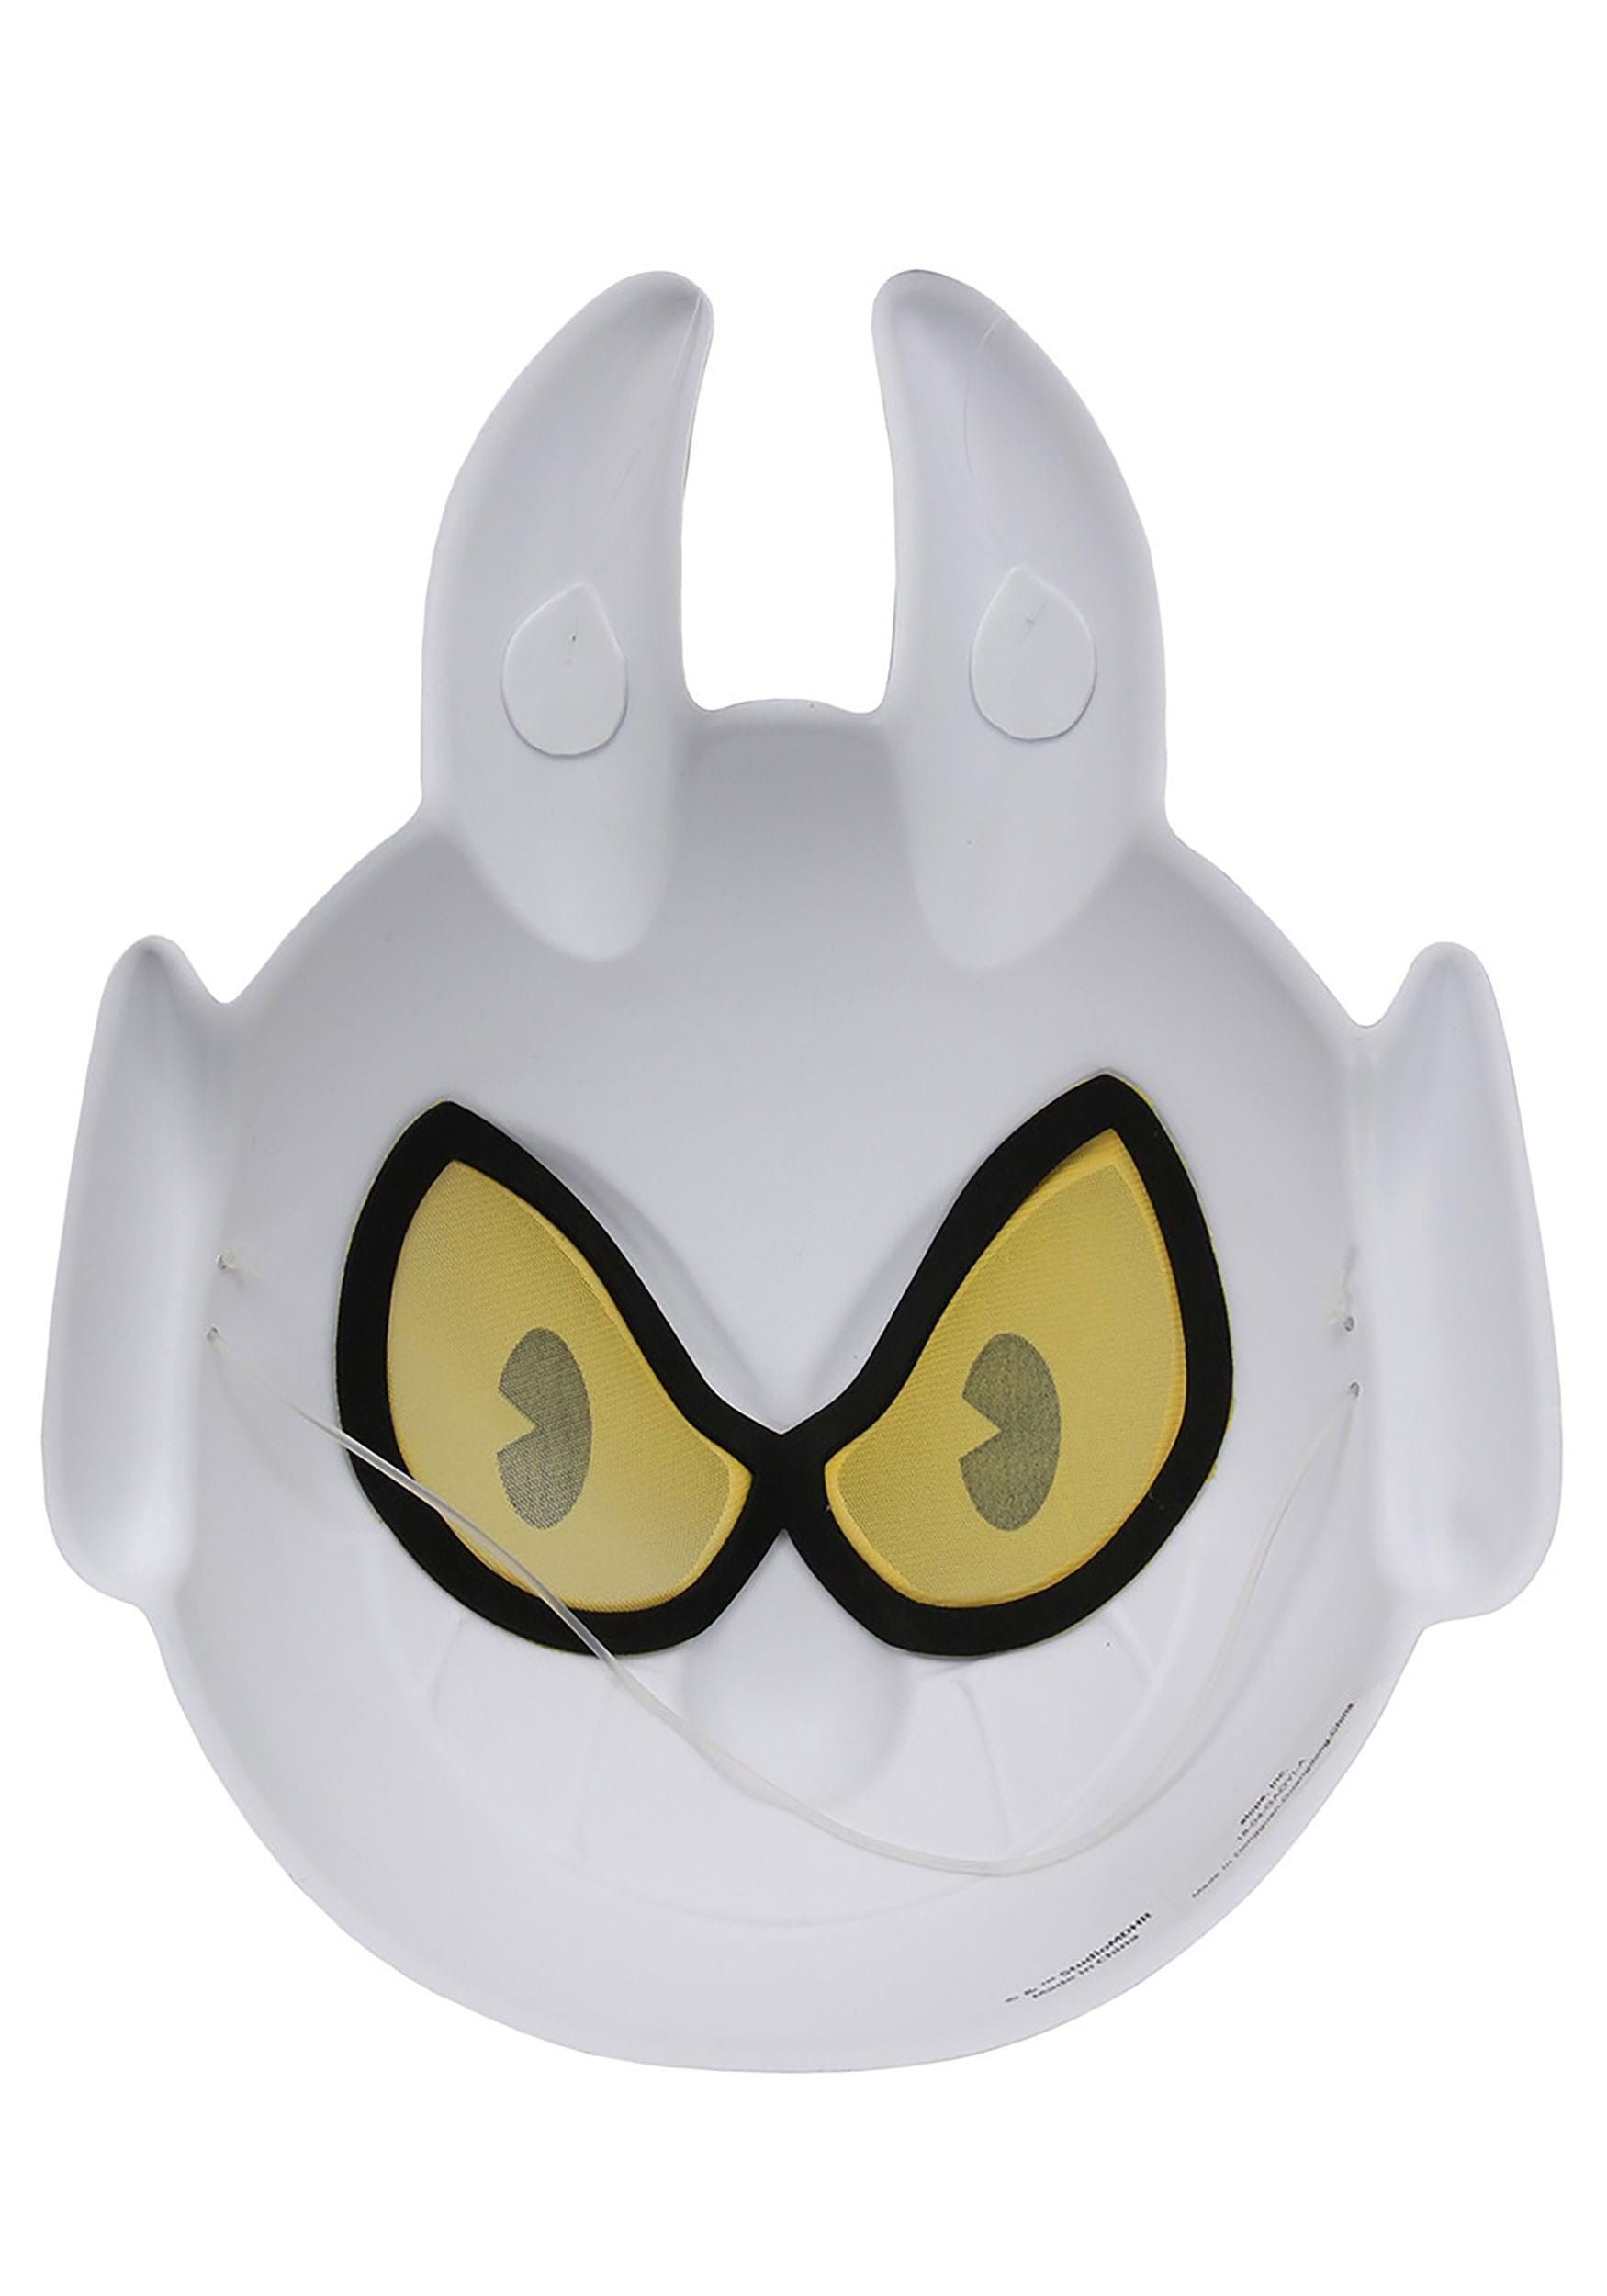  Cuphead King Dice Costume Vacuform Mask for Adults and